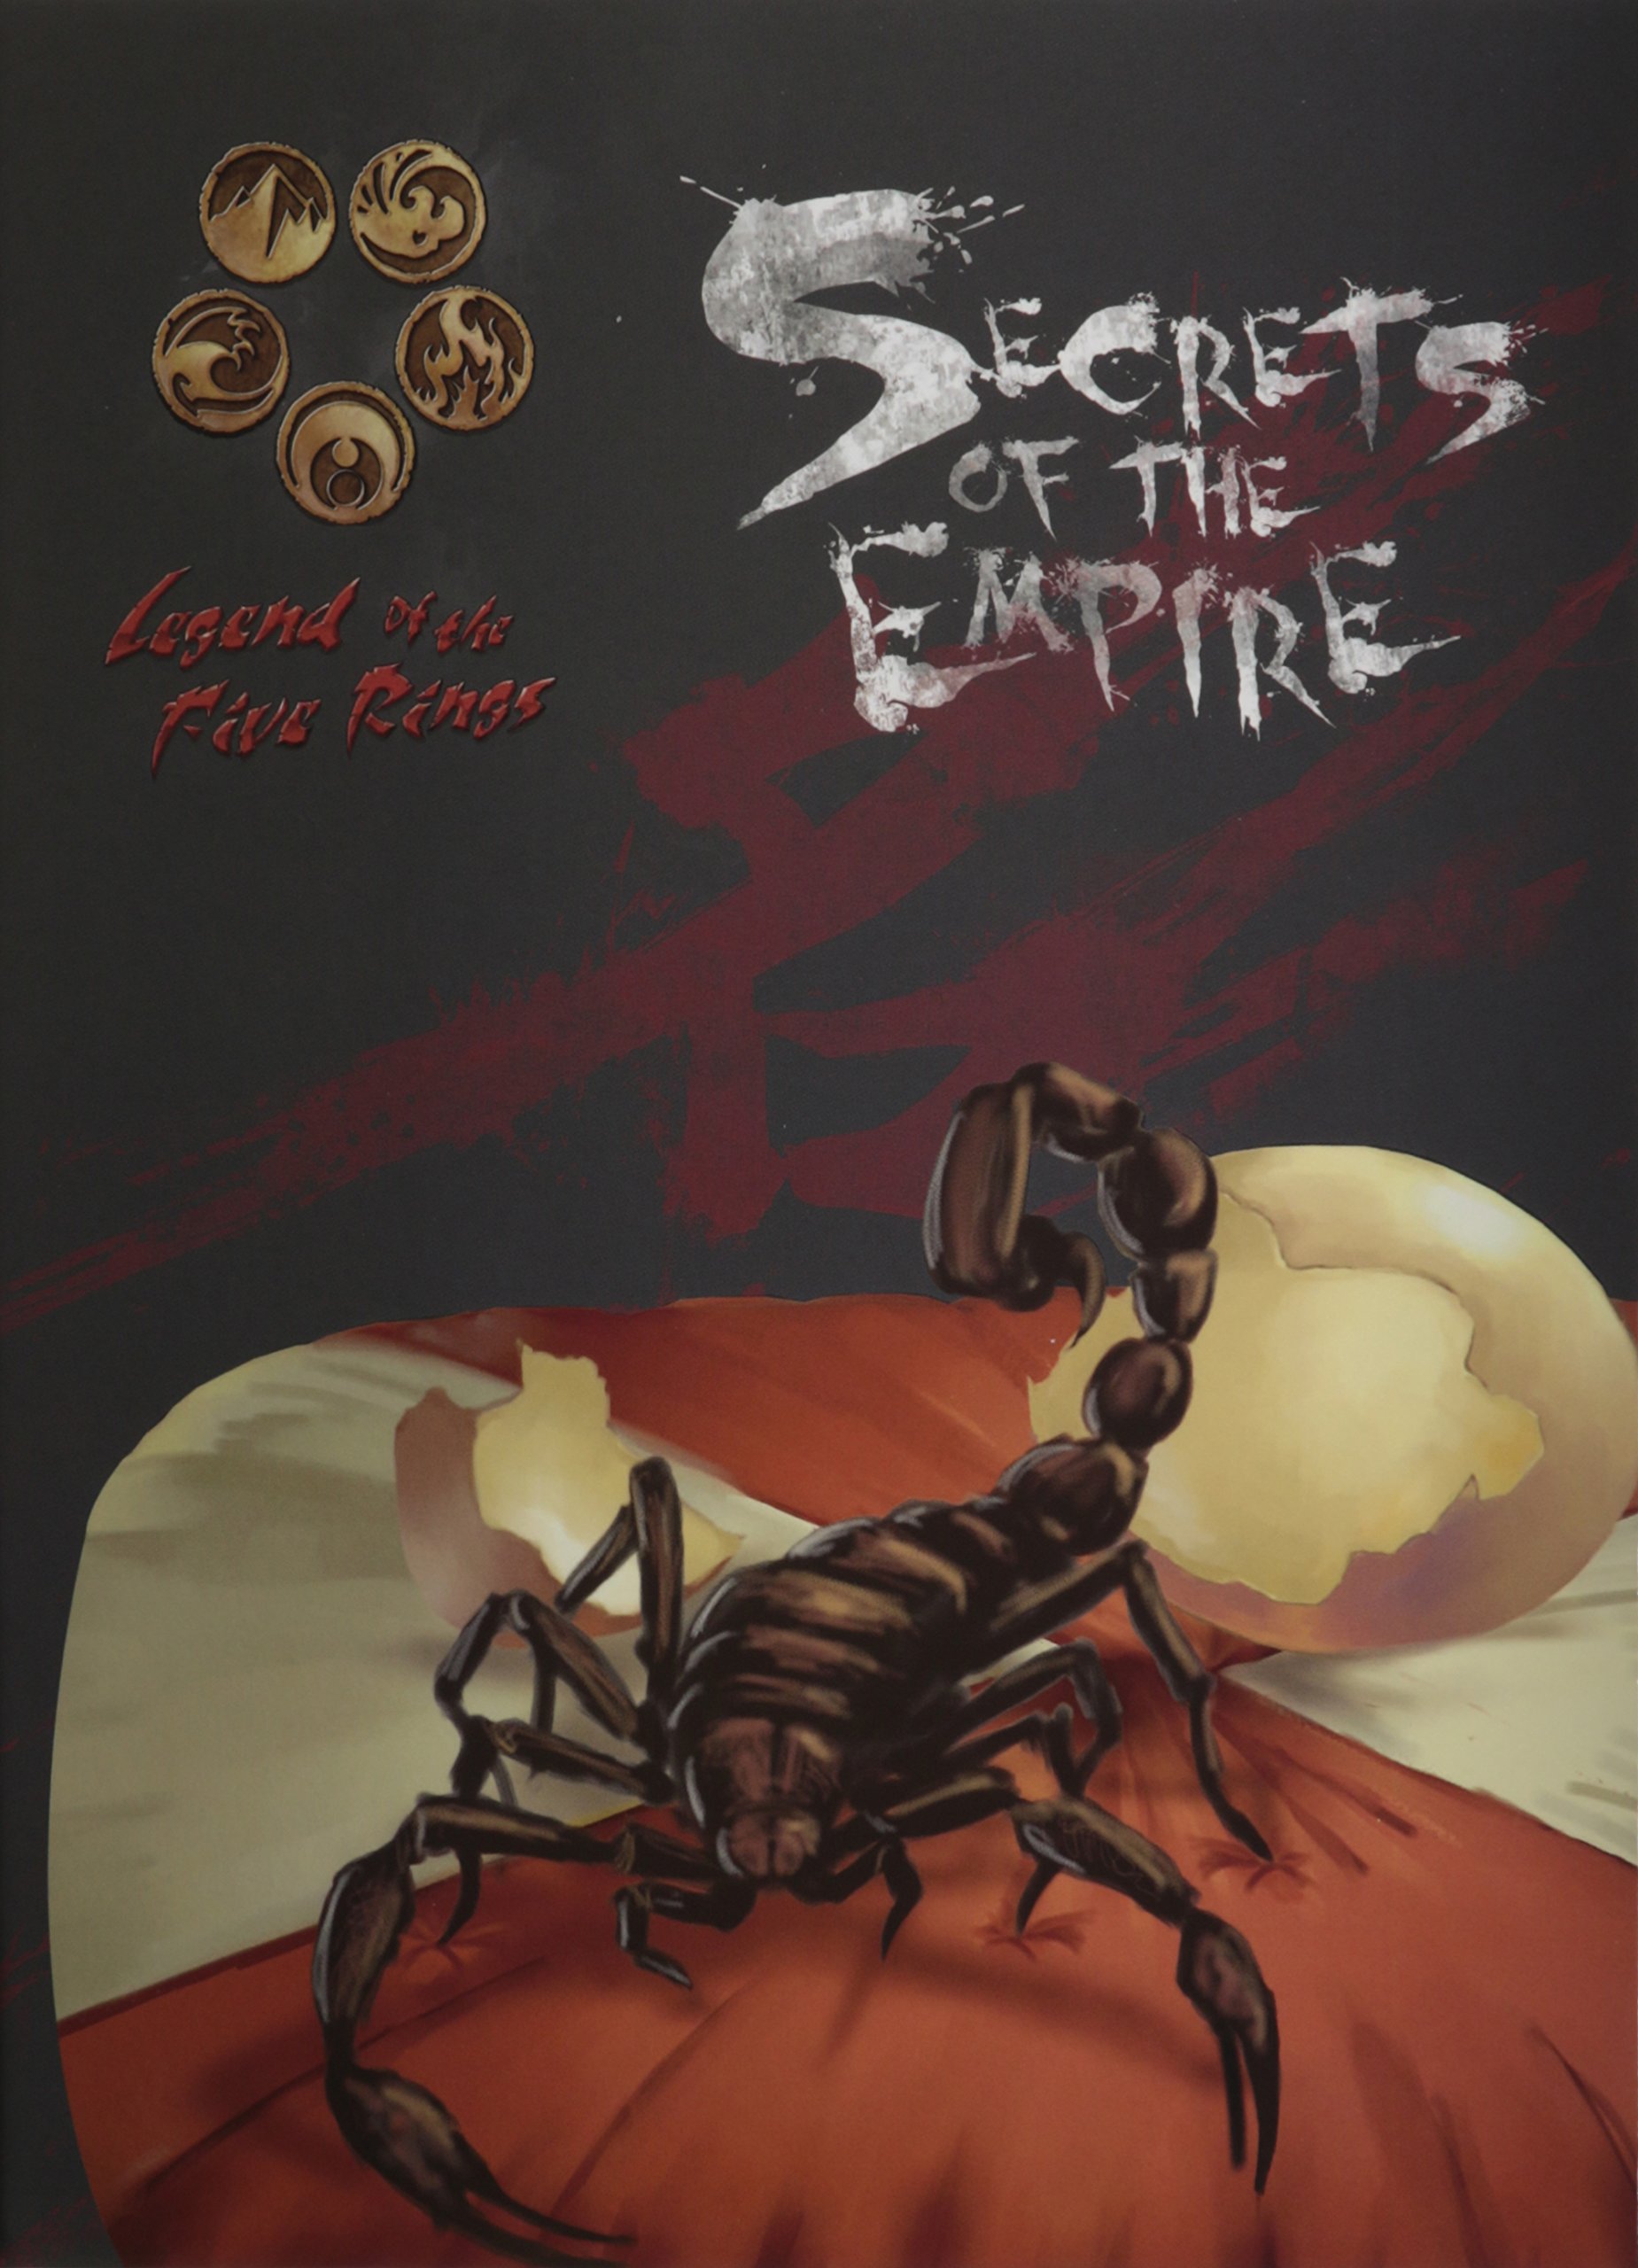 Legend of the Five Rings 4th ed: Secrets of the Empire - Used